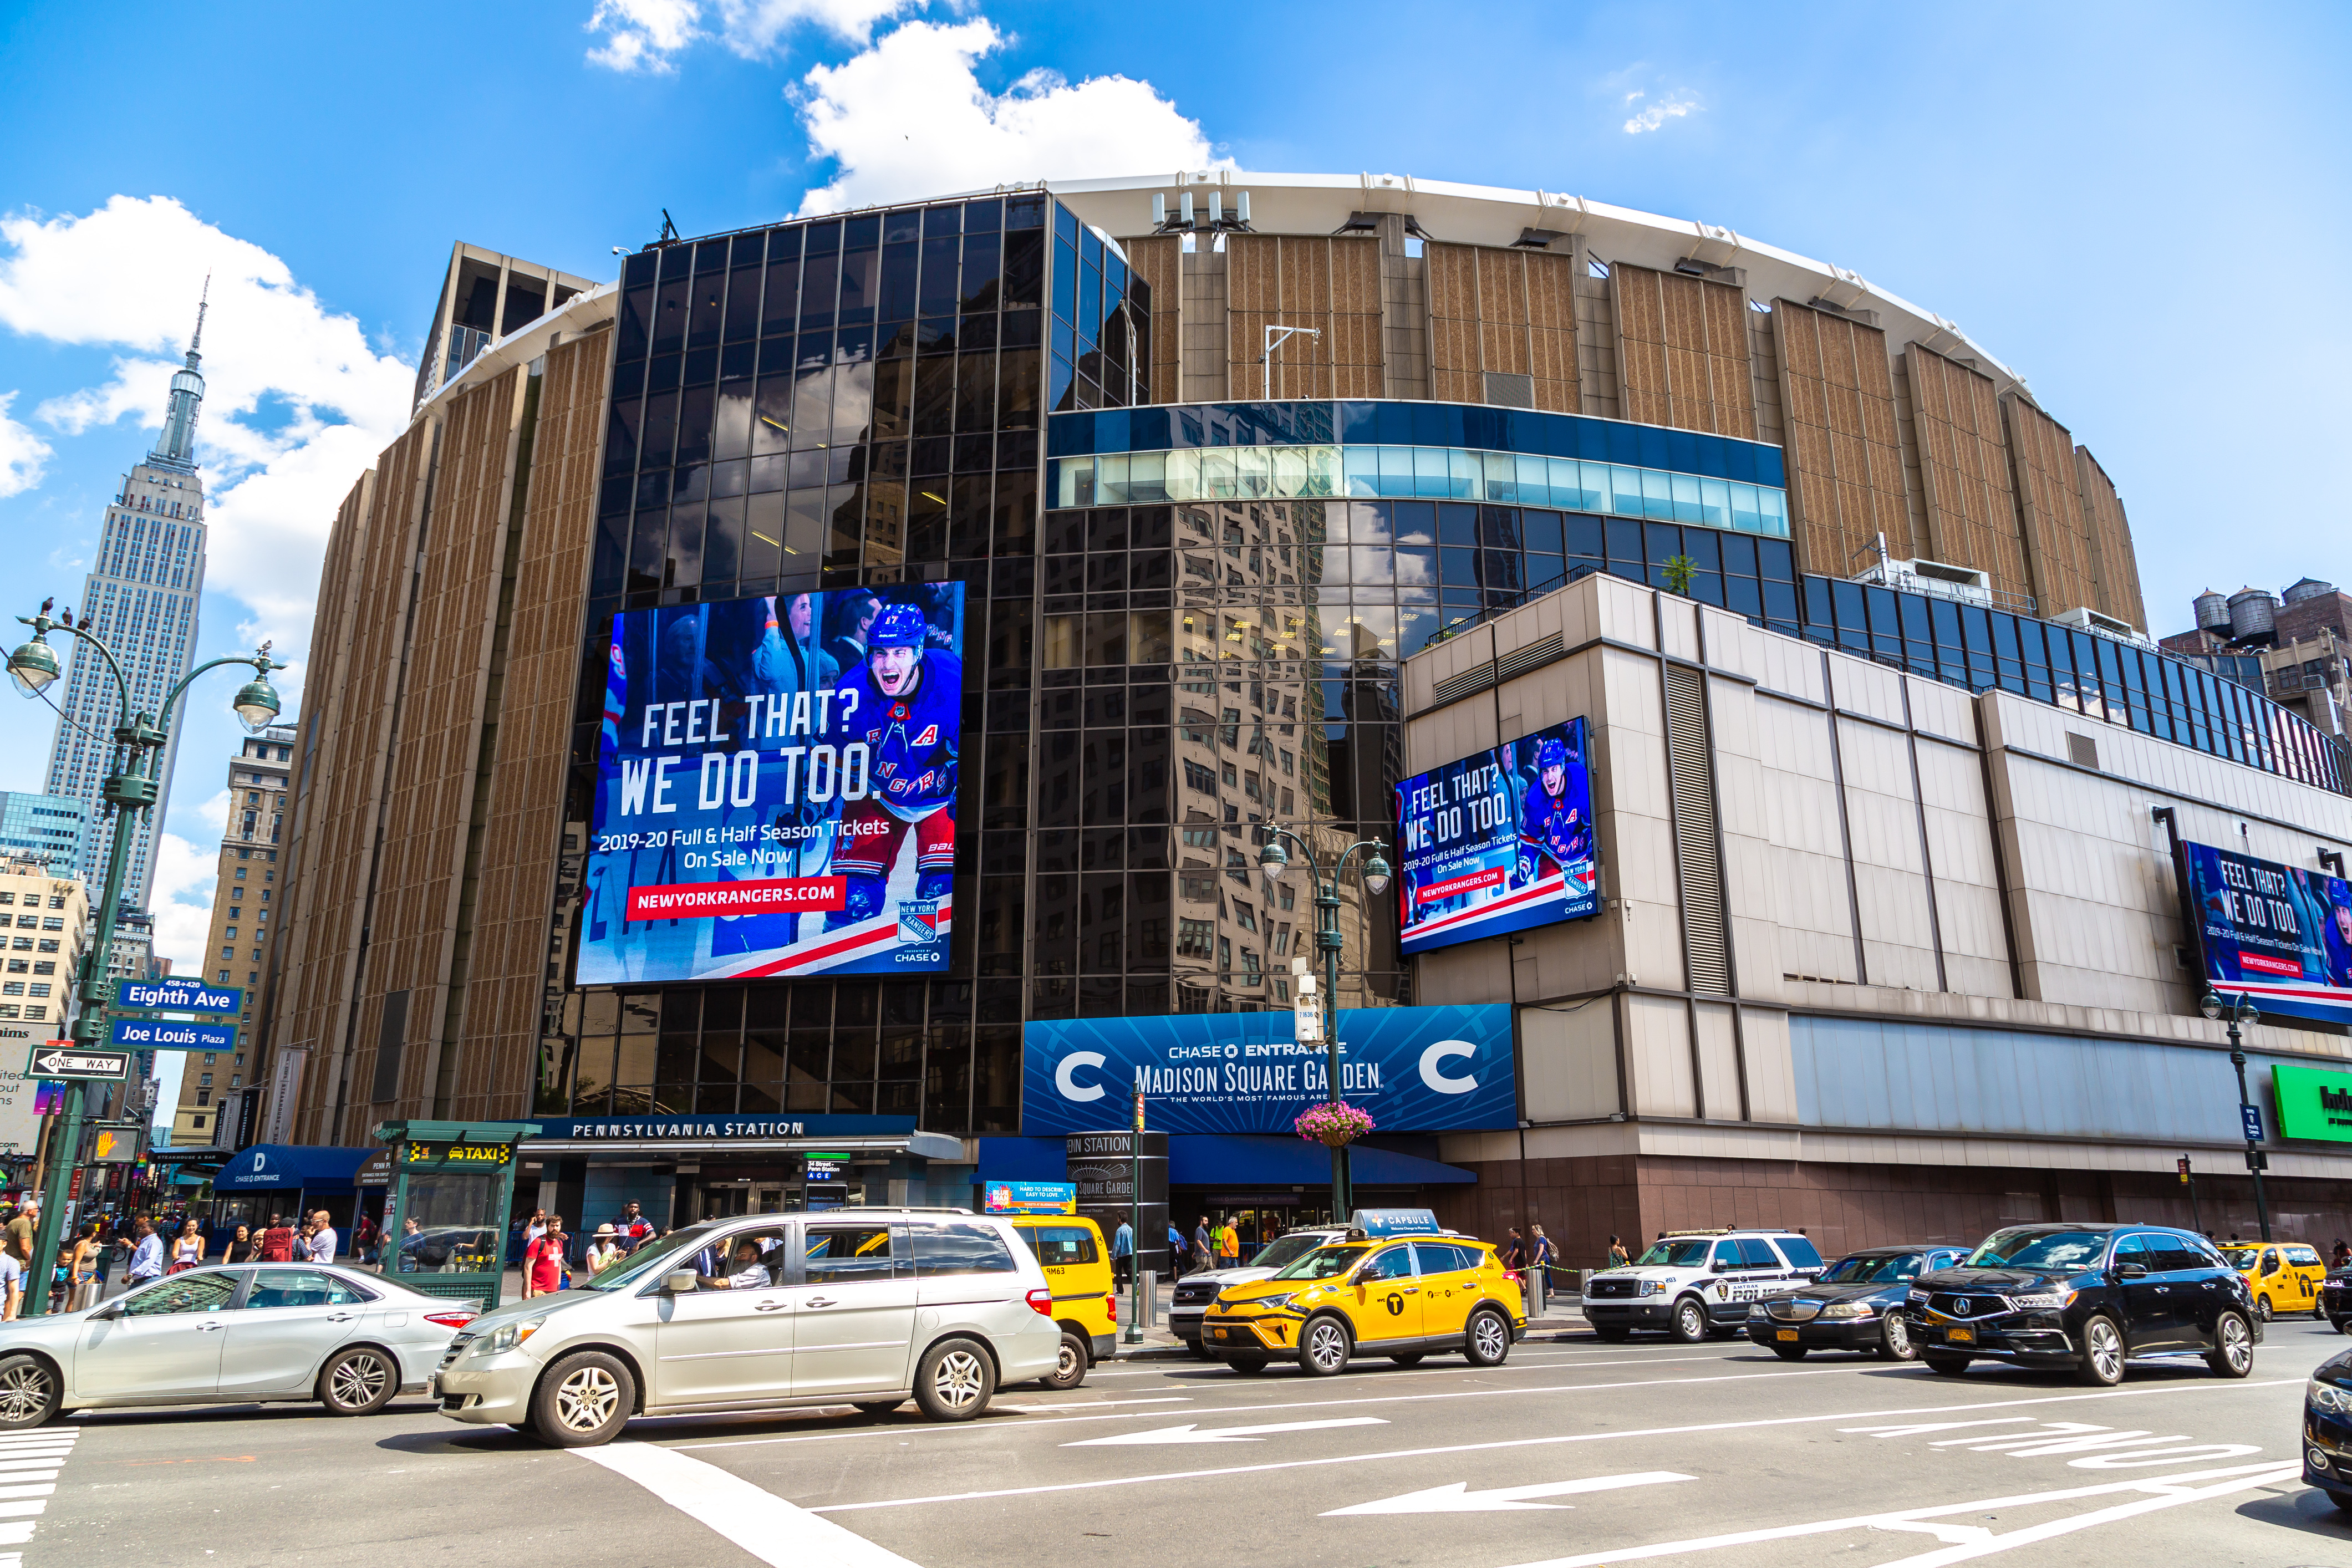 Judge Won't Quash Subpoena in Ongoing Battle Between State Liquor Authority  and Madison Square Garden Entertainment Corp.